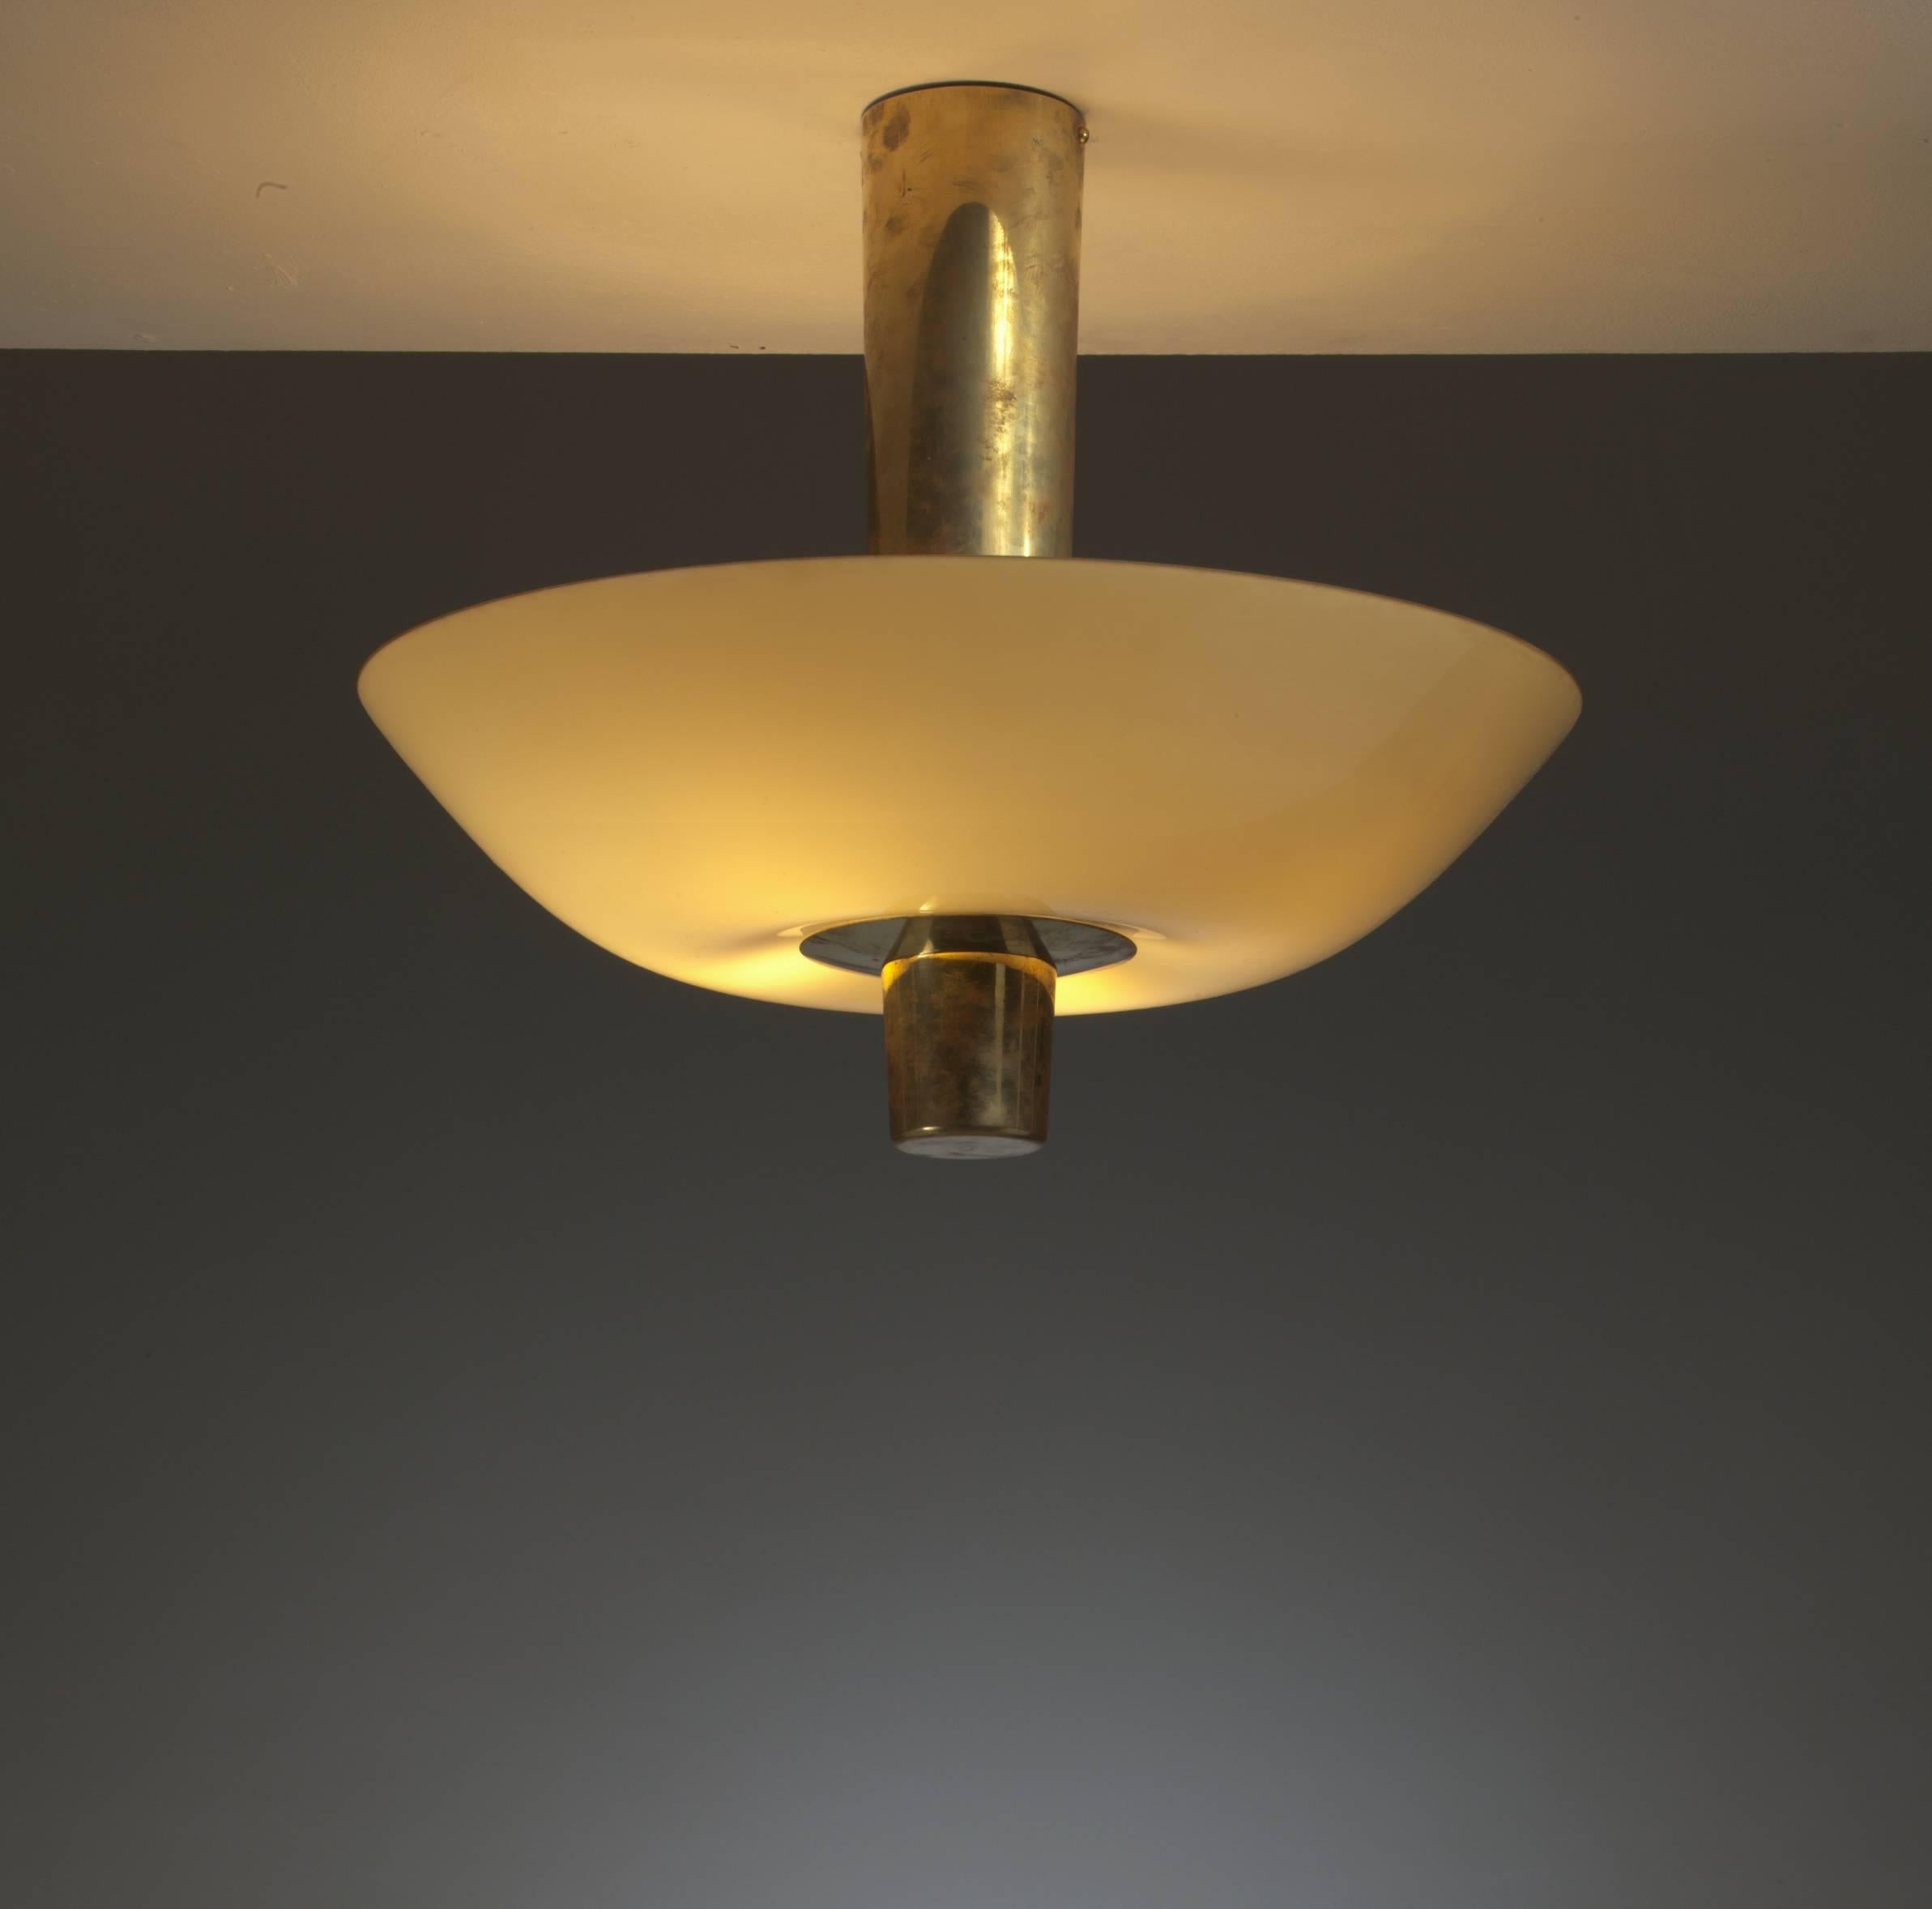 A Paavo Tynell model 9053 ceiling lamp for Idman with a long brass cylindrical stem holding four lamps inside the light yellow glass shade.
The chandelier is in a perfect condition and matches very well with the other 9053 Tynell flush mount in our